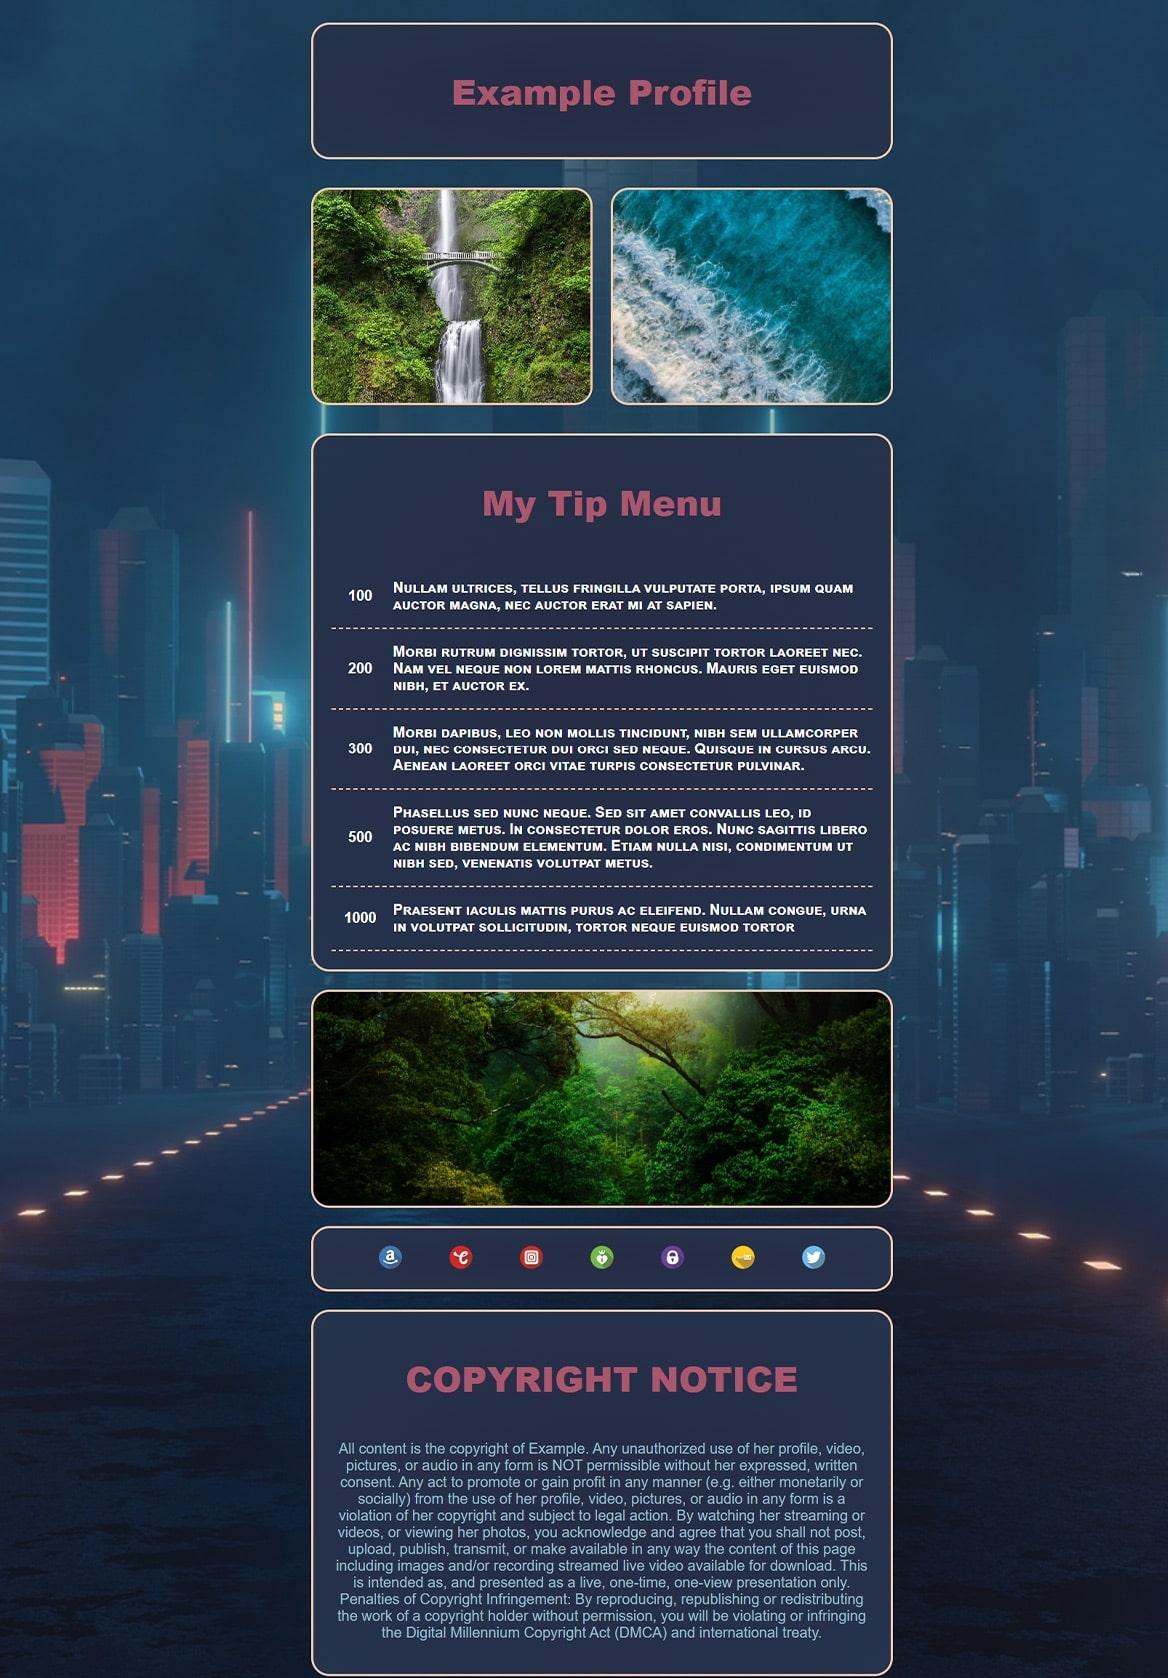 Skylight Runway theme allows you to escape from reality